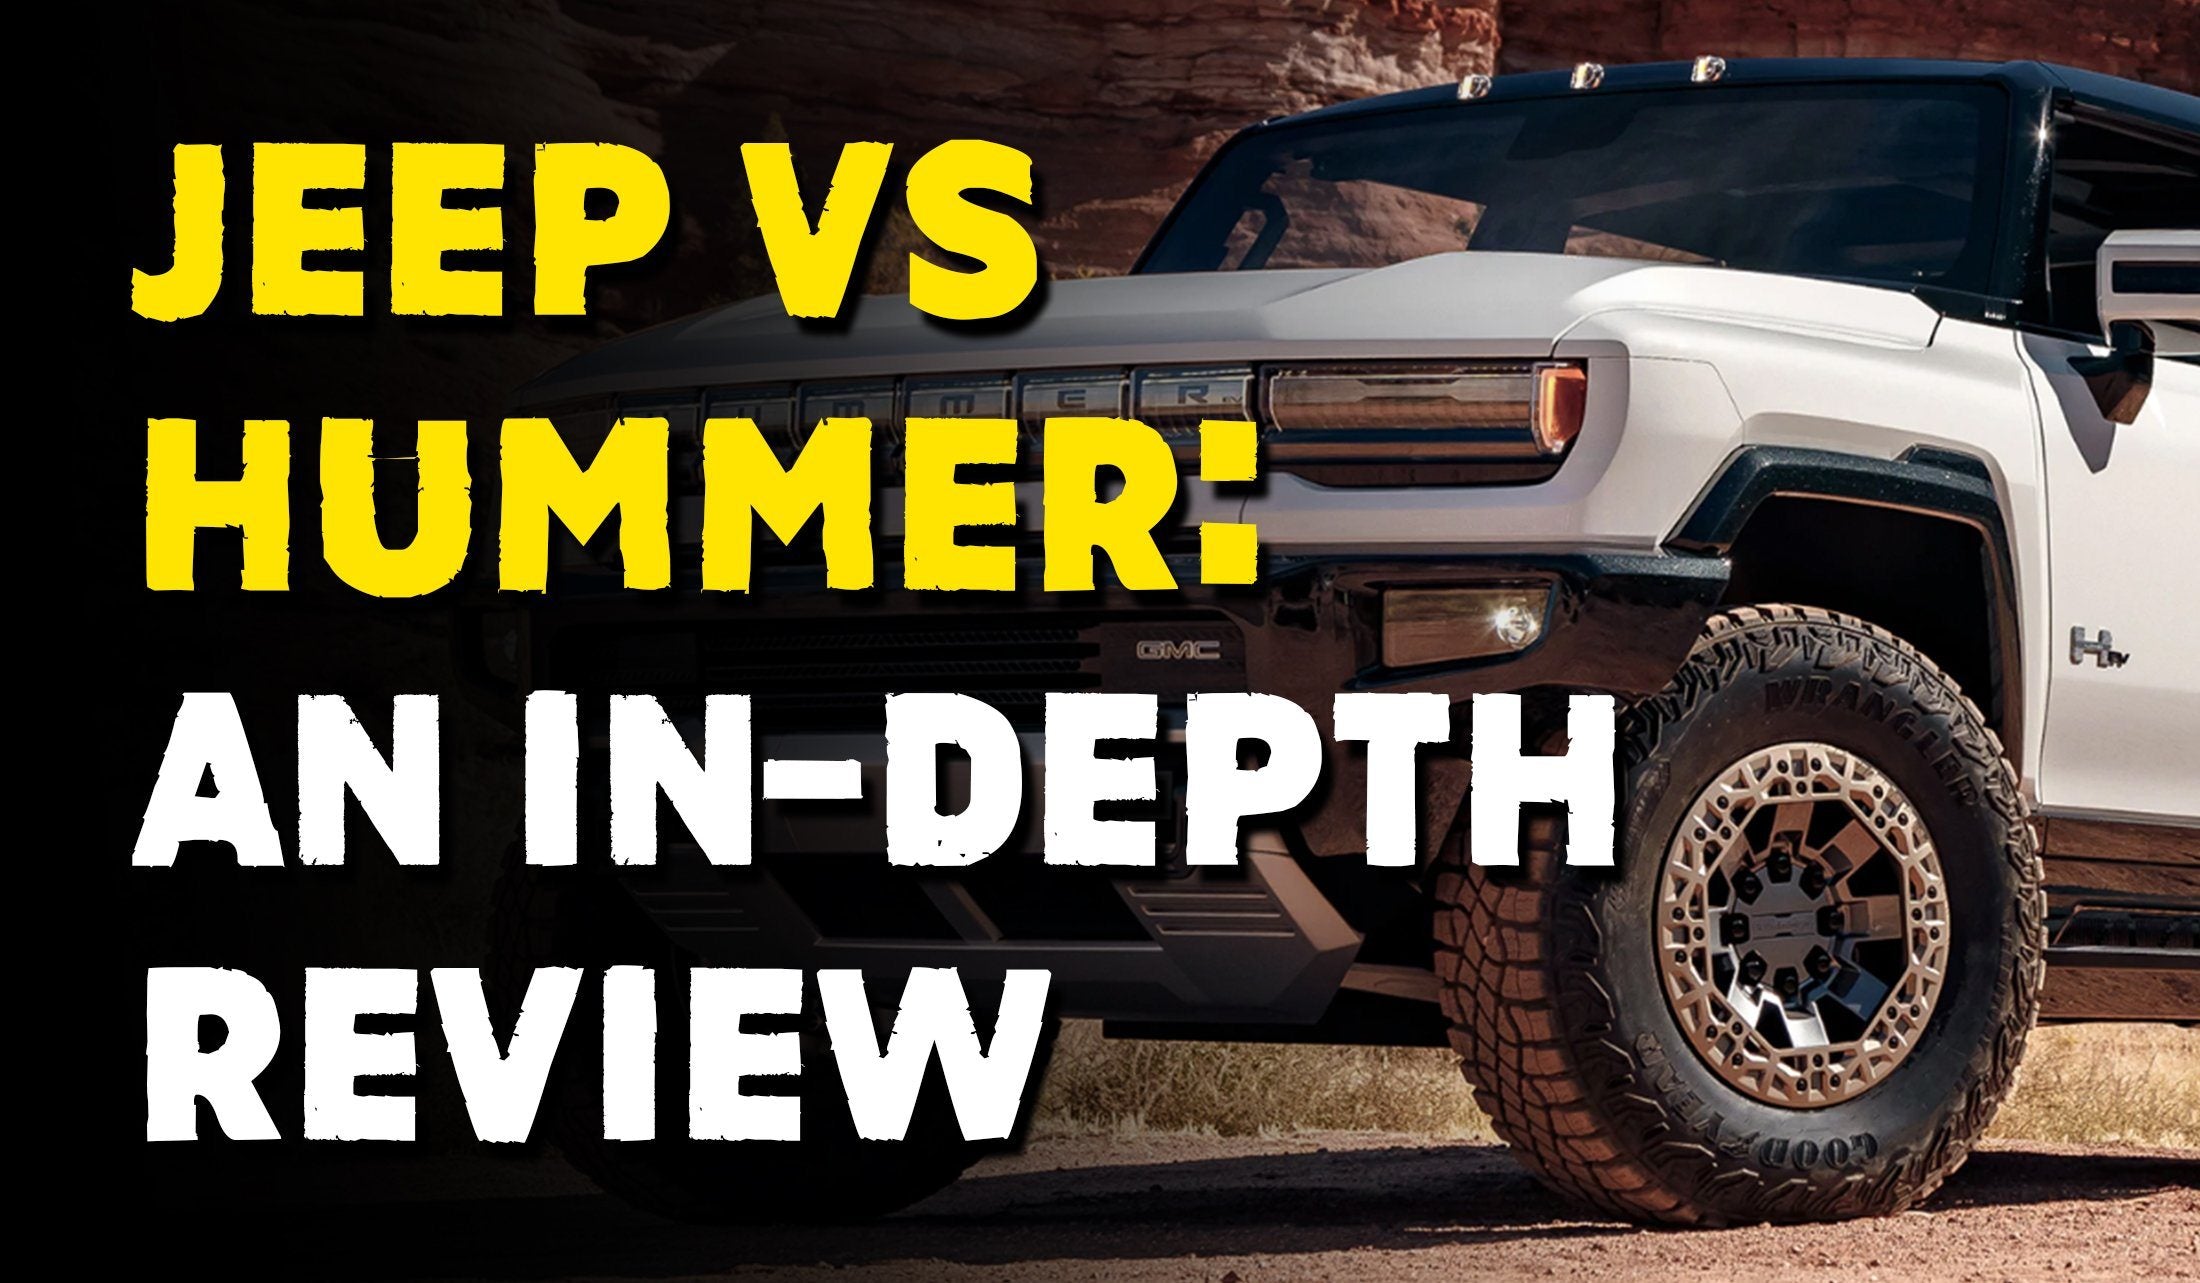 Jeep VS Hummer: An In-Depth Review